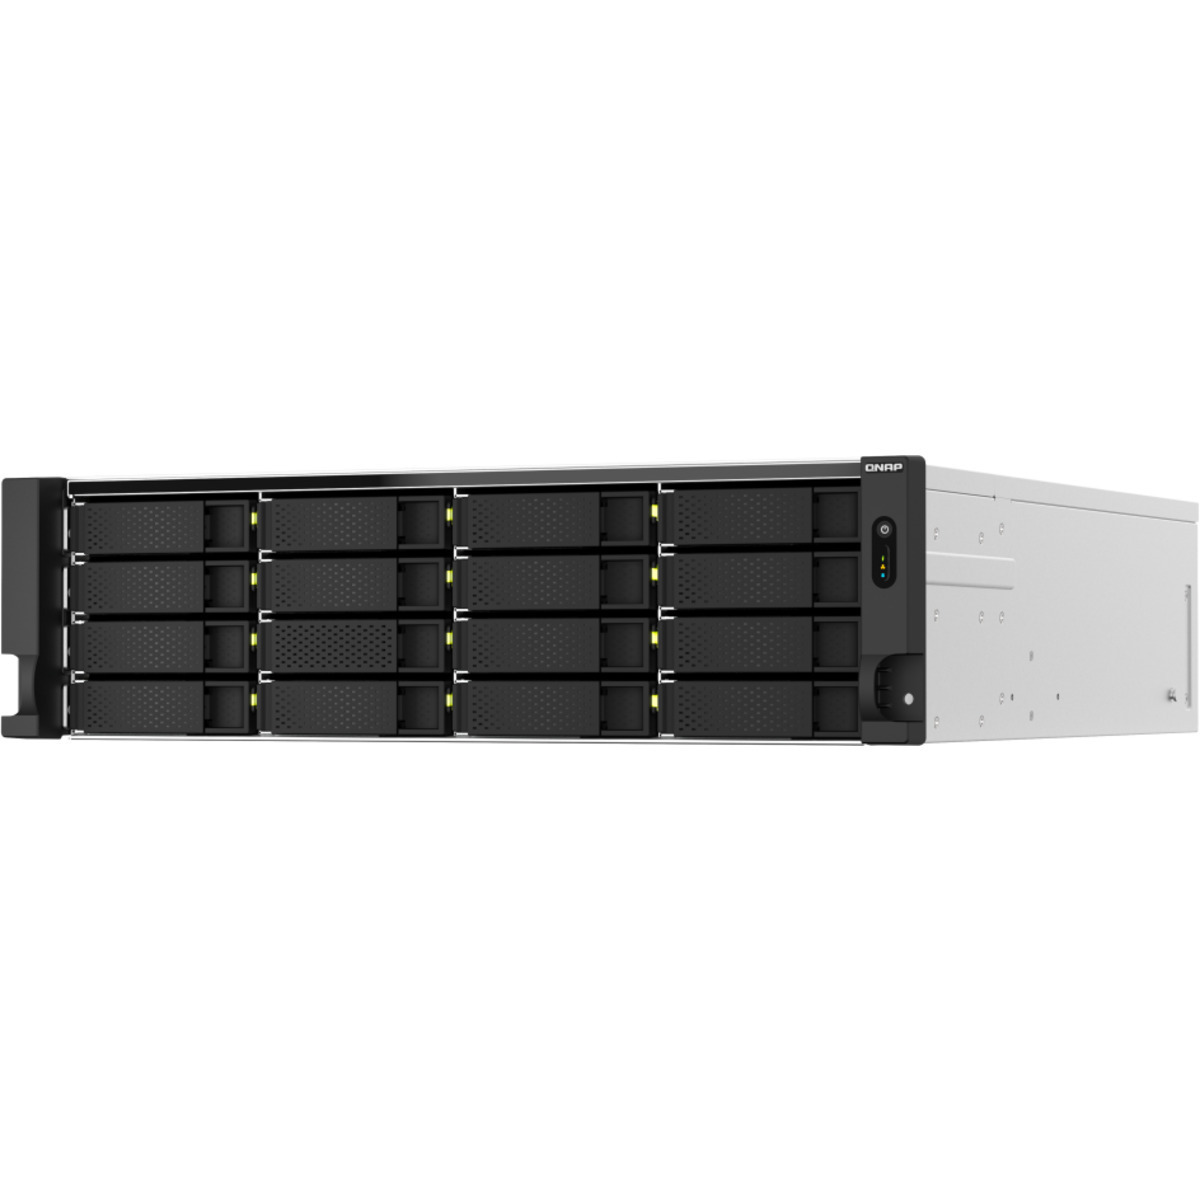 QNAP TS-h2287XU-RP-E2336 NAS - Network Attached Storage Device Burn-In Tested Configurations